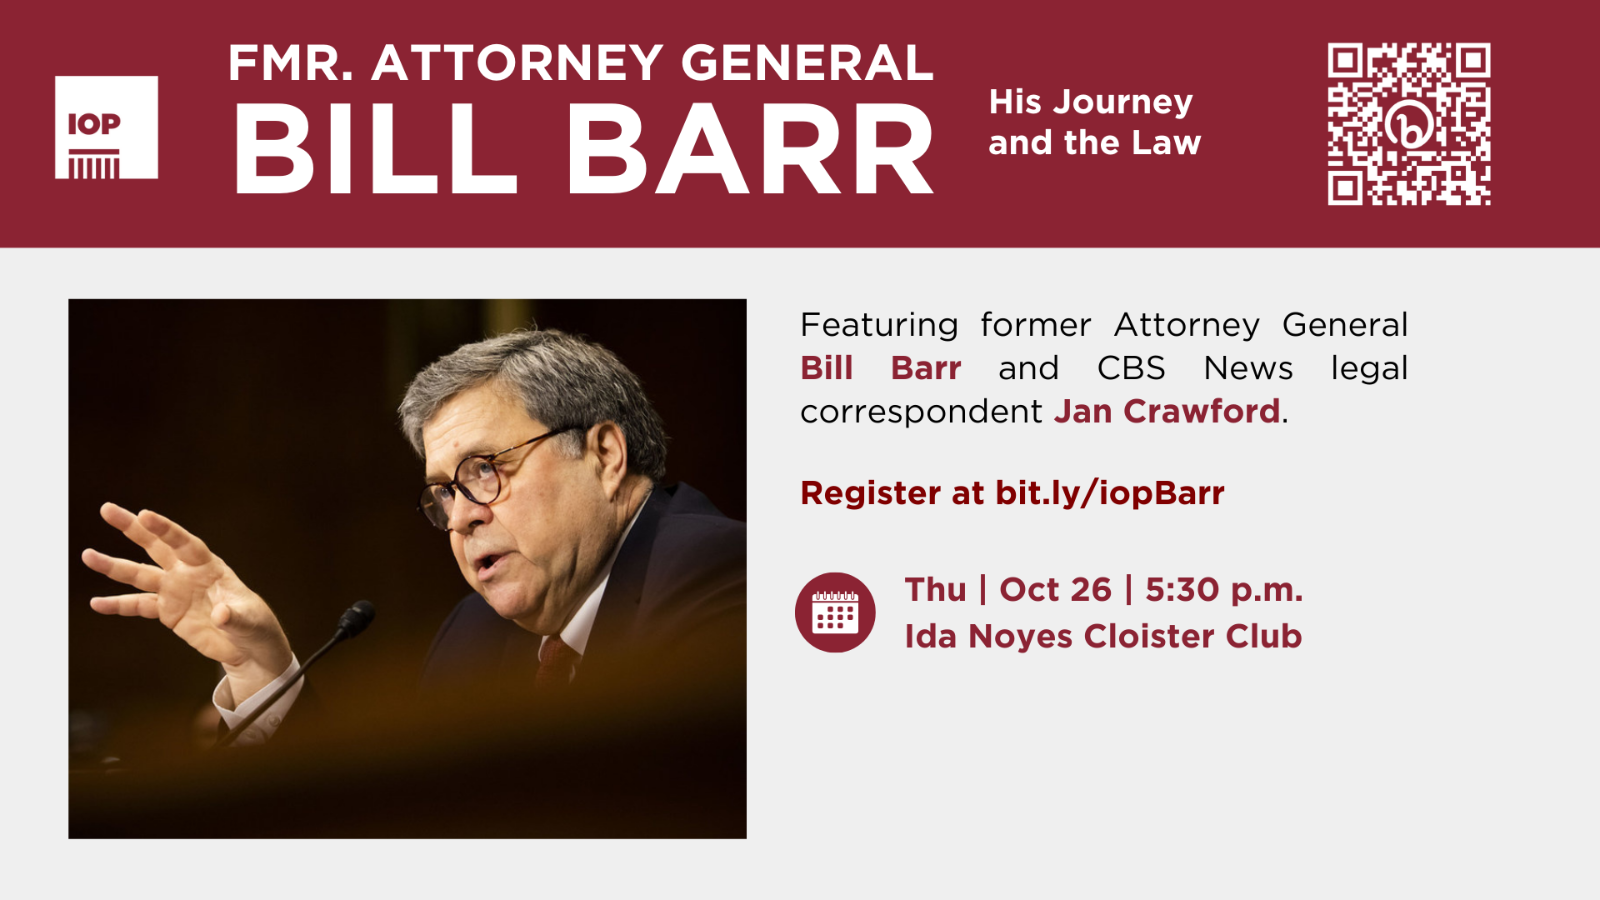 Poster Image for Former Attorney General Bill Barr: His Journey and the Law